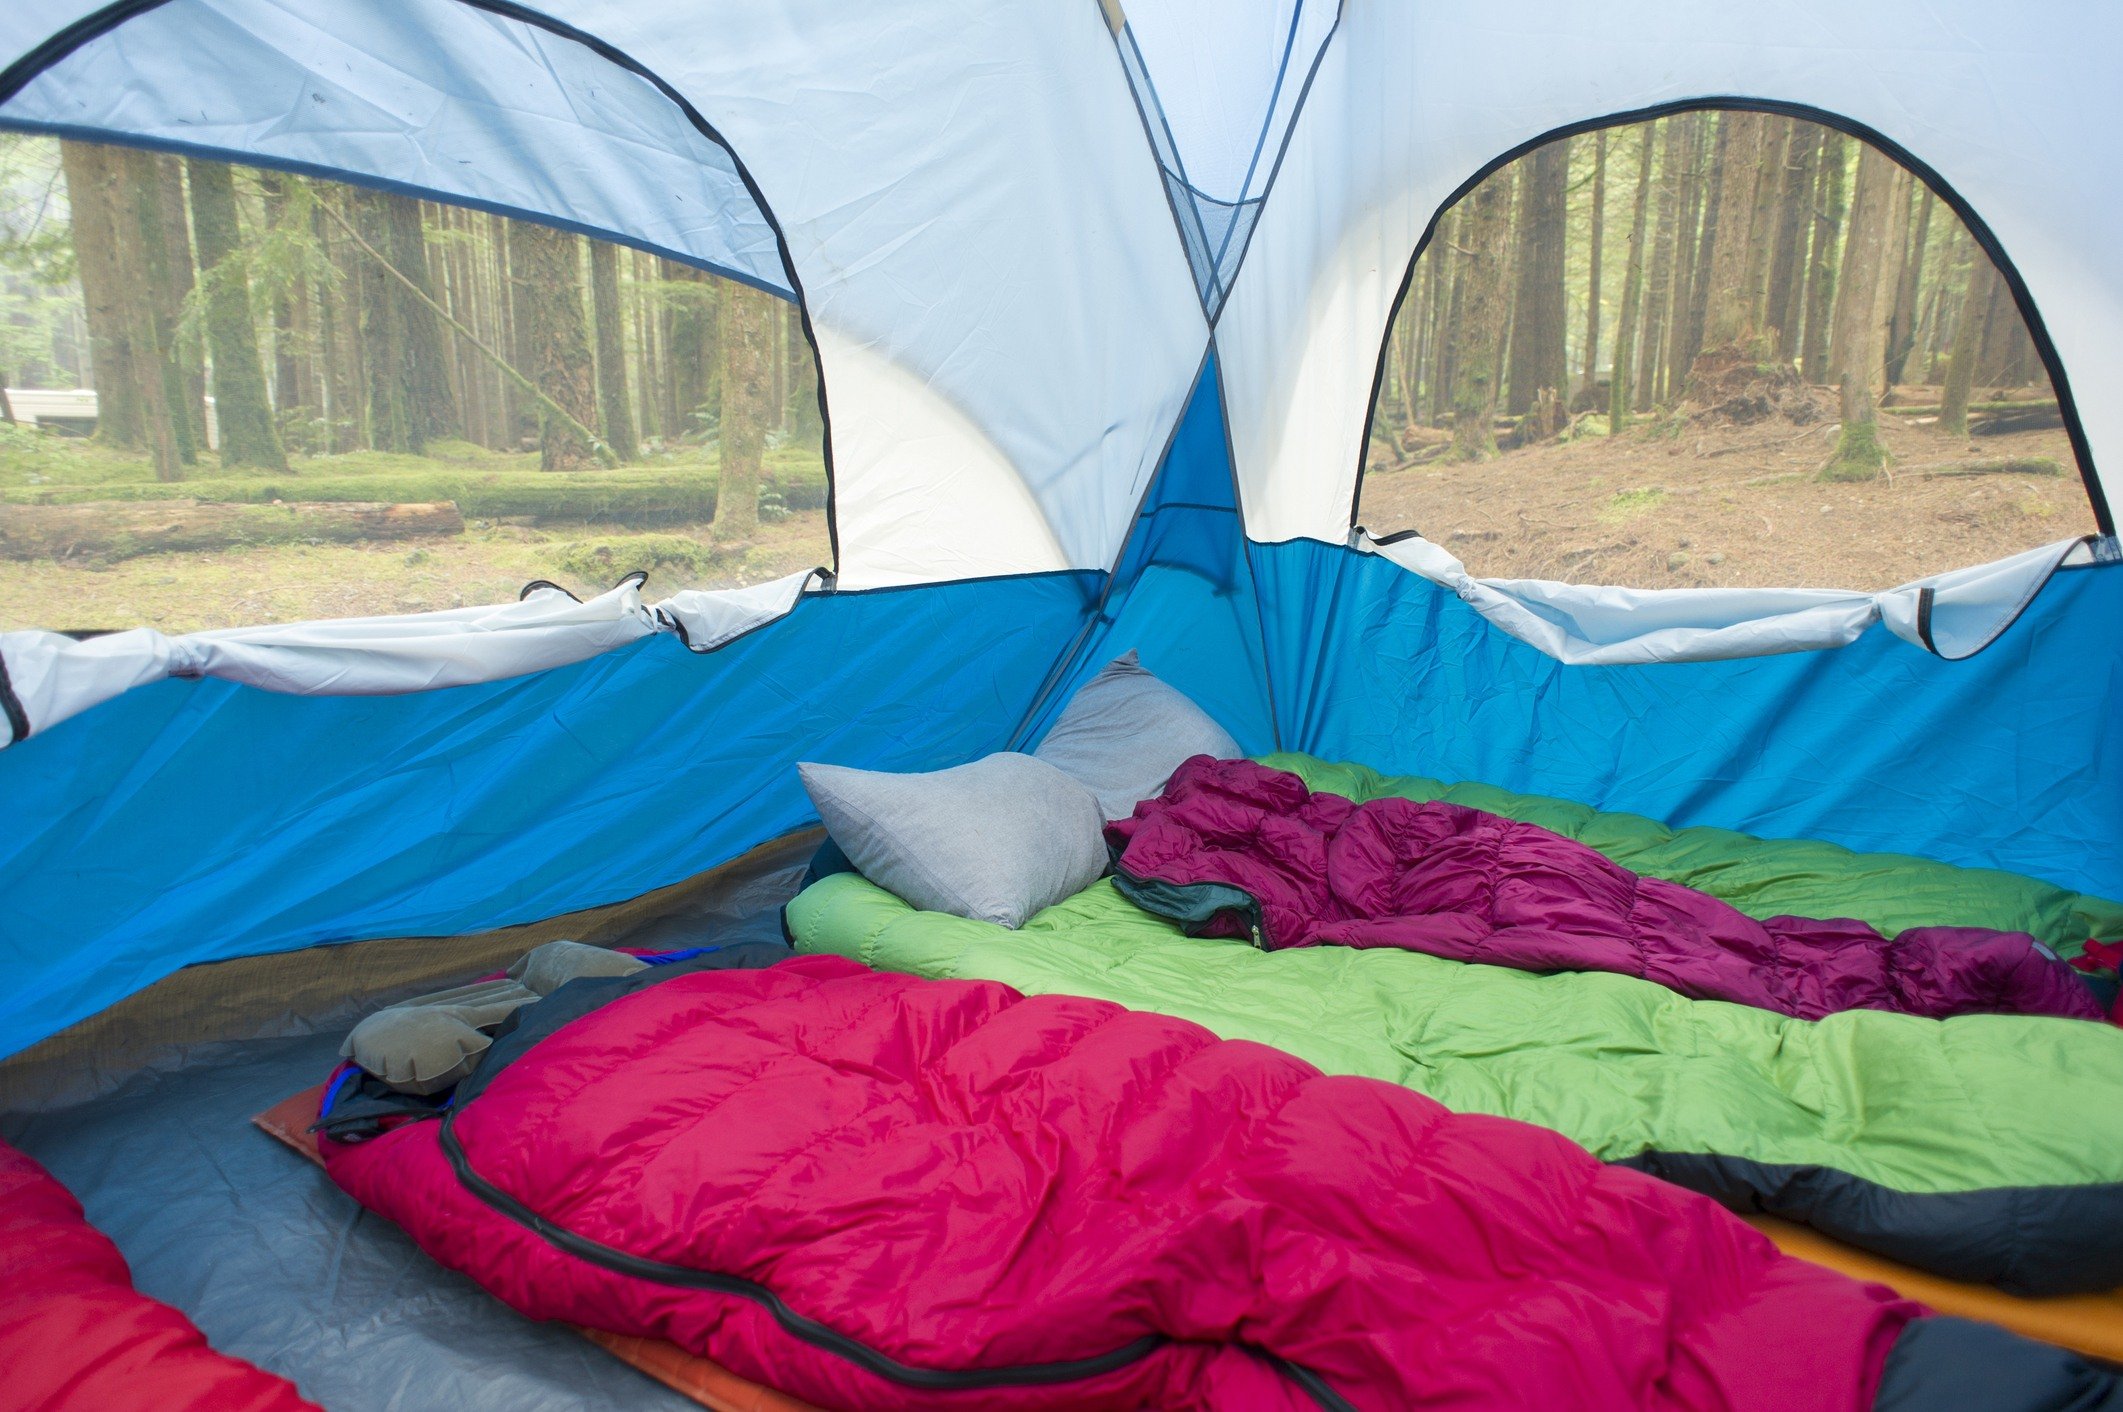 The interior of a tent with multiple sleeping bags